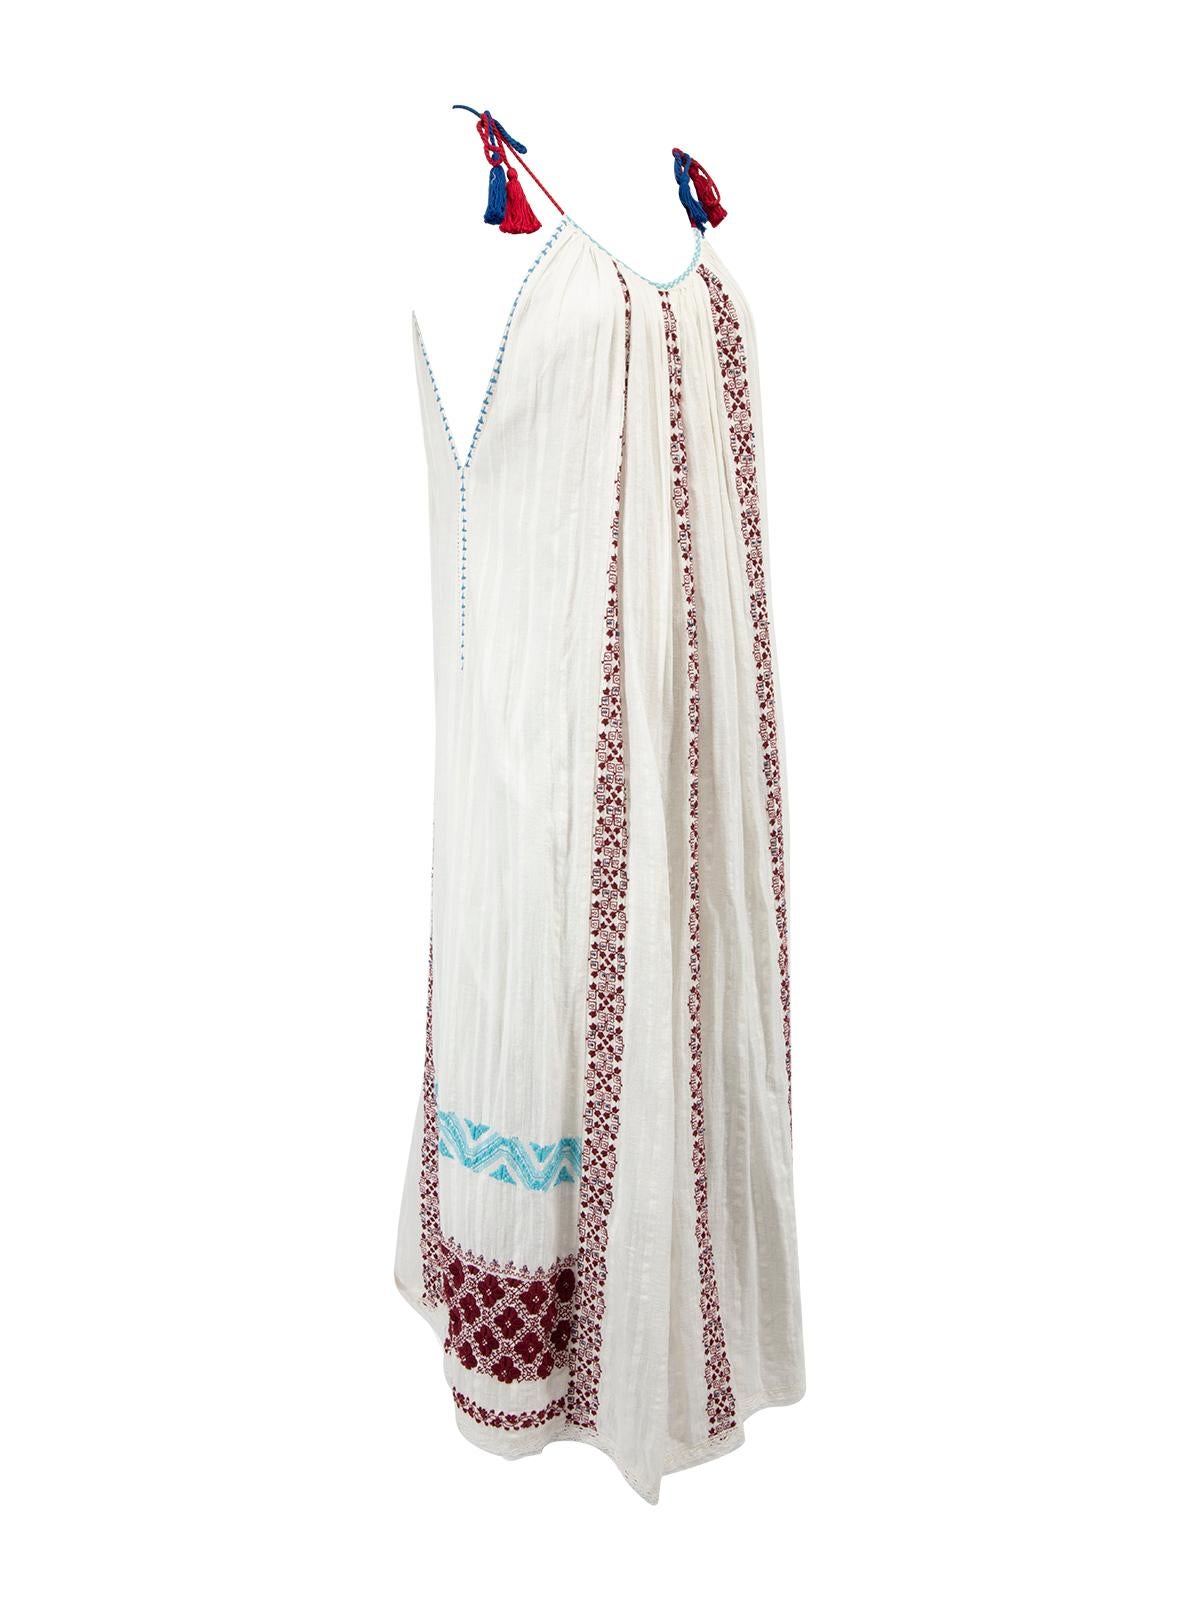 CONDITION is Very good. Hardly any visible wear to dress is evident on this used Ulla Johnson designer resale item. Details White Cotton Maxi dress Sleeveless Round neckline Red and blue shoulder straps with tassels Aztec pattern embroidered in blue